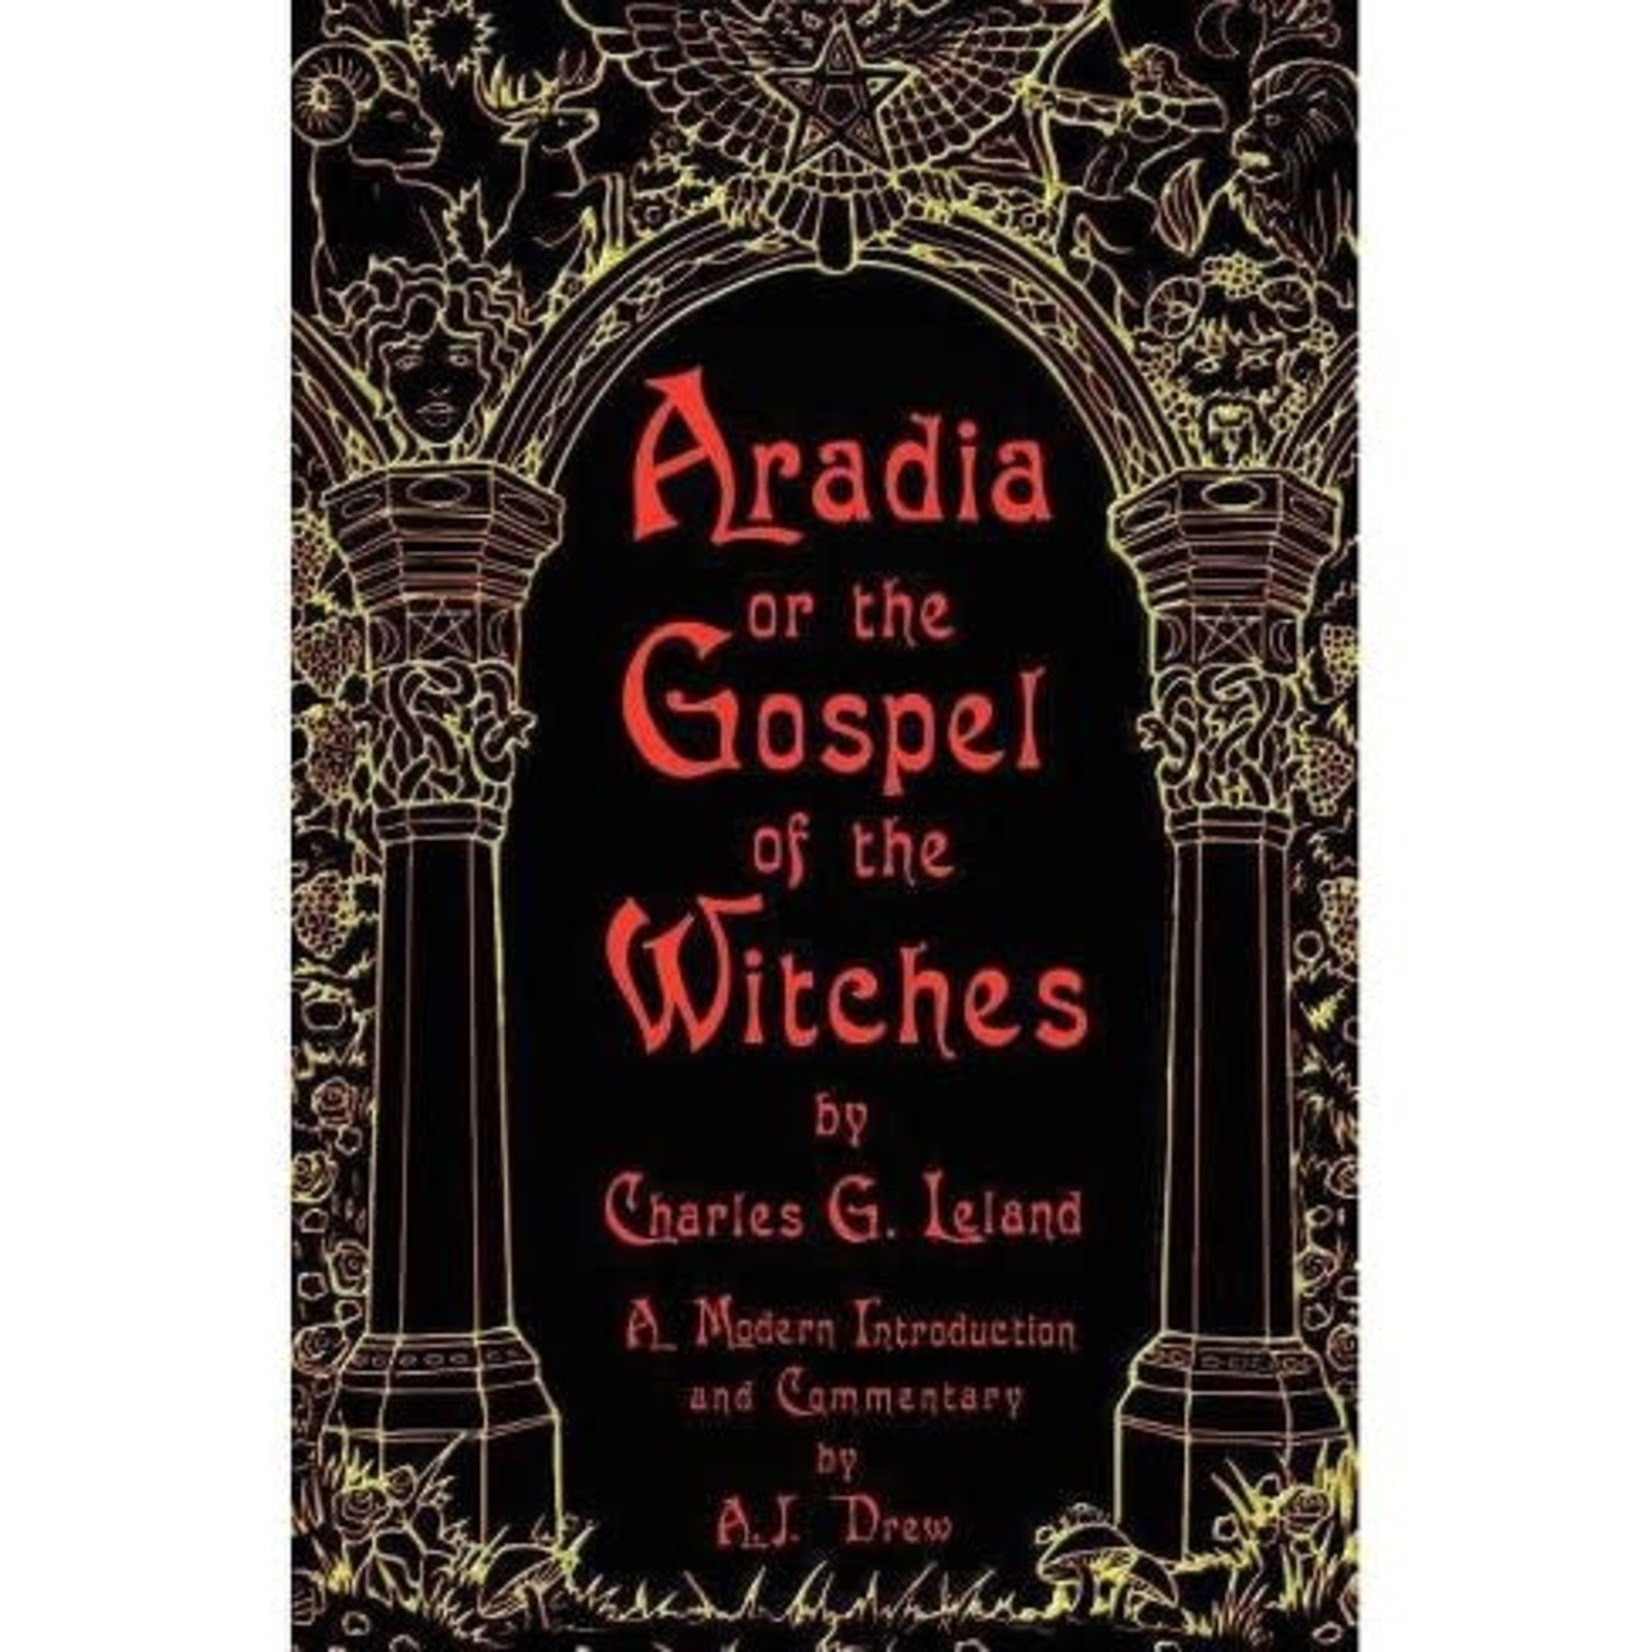 Aradia: Gospel of the Witches by Charles Leland